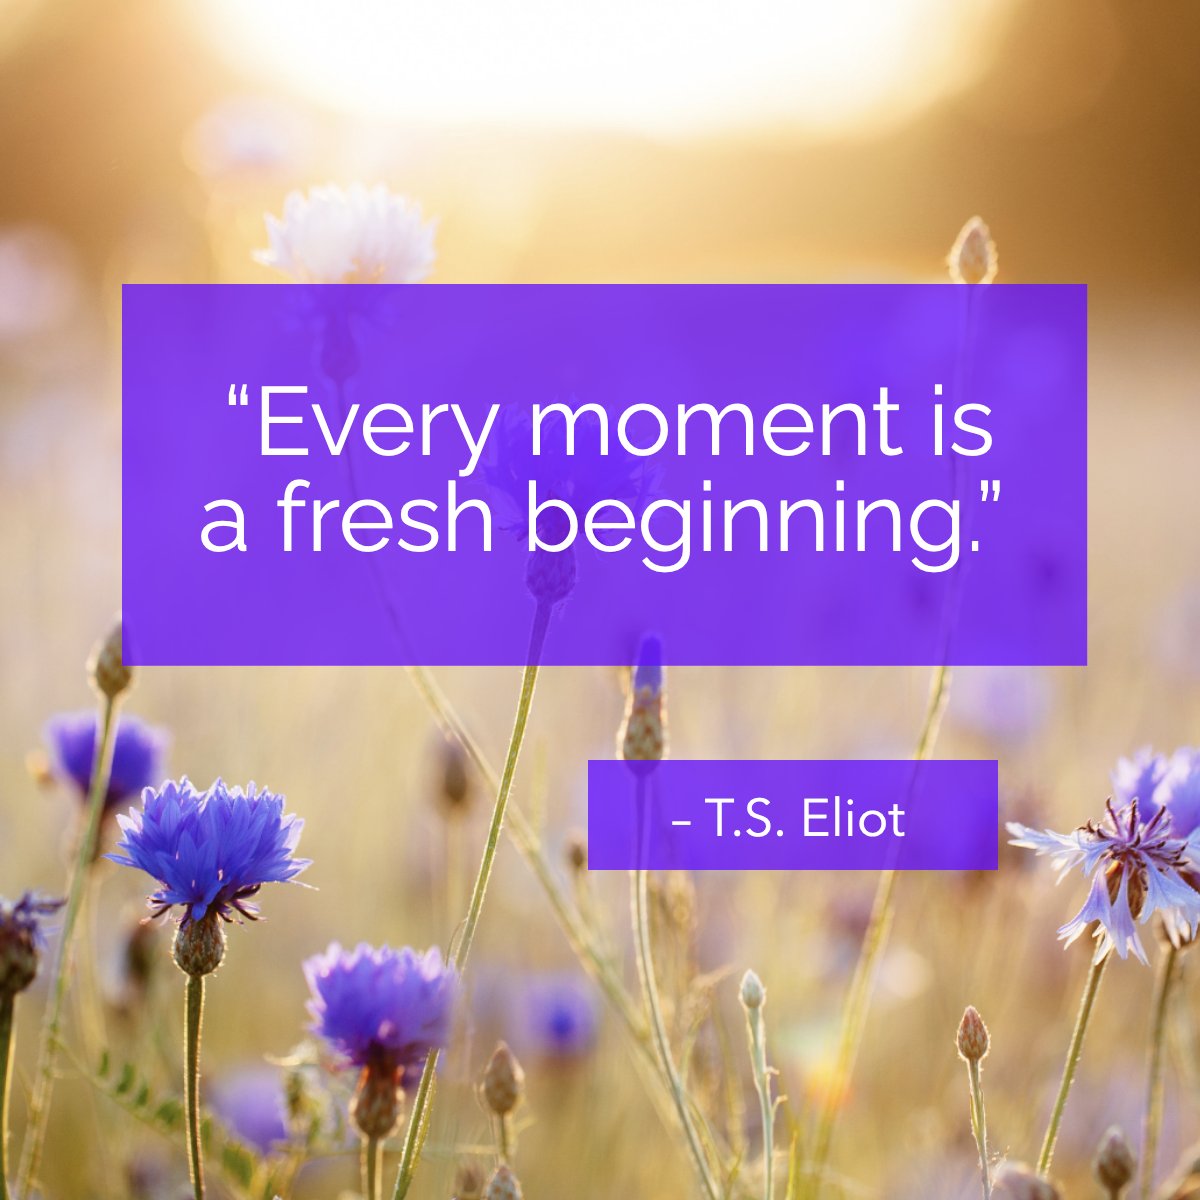 Thomas Stearns Eliot OM was a poet, essayist, publisher, playwright, literary critic, and editor.

Considered one of the 20th century's major poets 

#tseliot #beginnings #inspiring #inspirational #quote
 #veteranhomebuyers #militaryhomebuyers #veteransellinghome